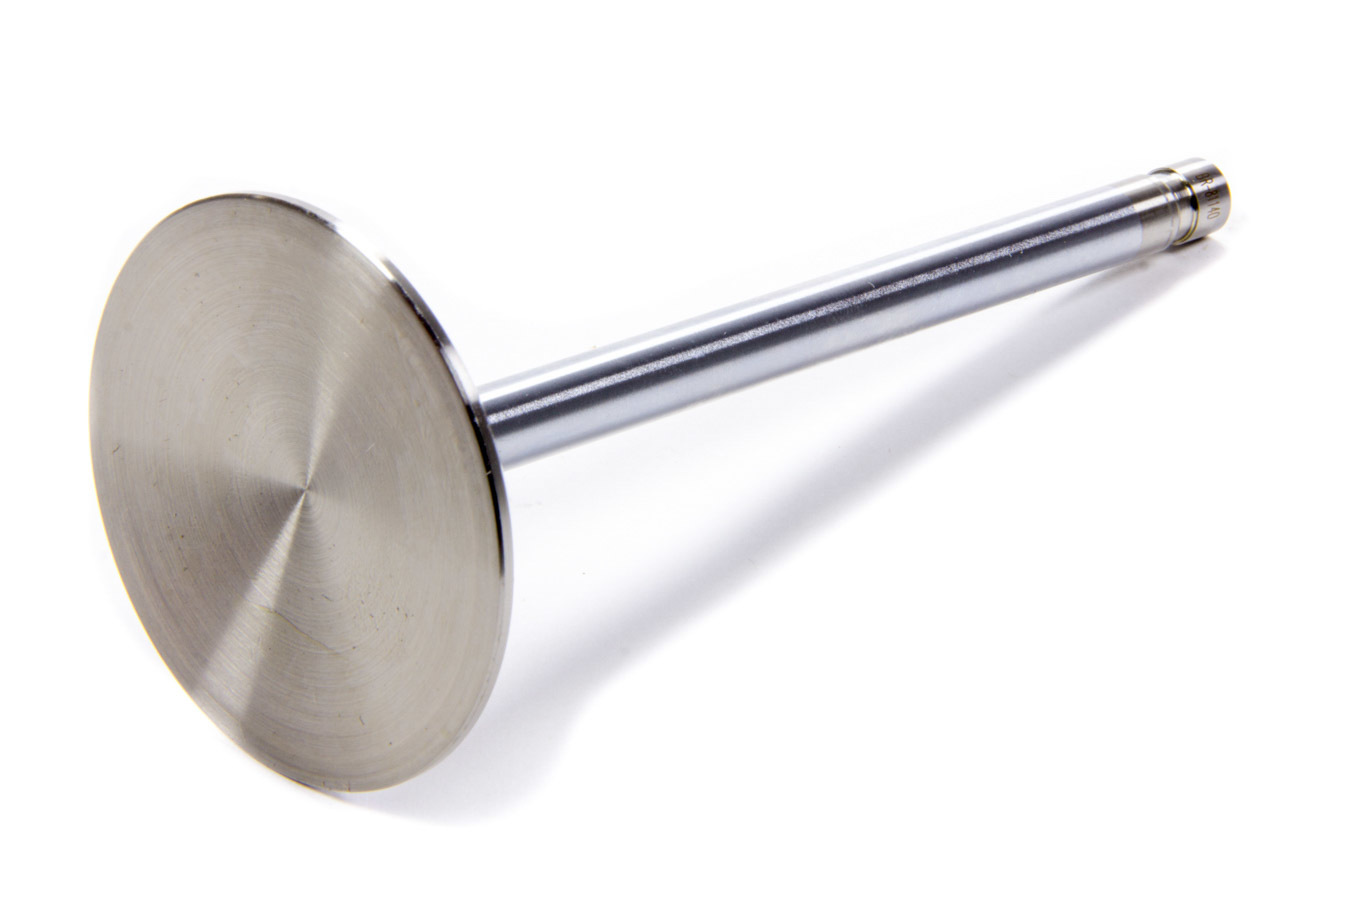 Brodix BR81341 Intake Valve, 2.300 in Head, 11/32 in Valve Stem, 5.568 in Long, Stainless, Big Block Chevy, Each